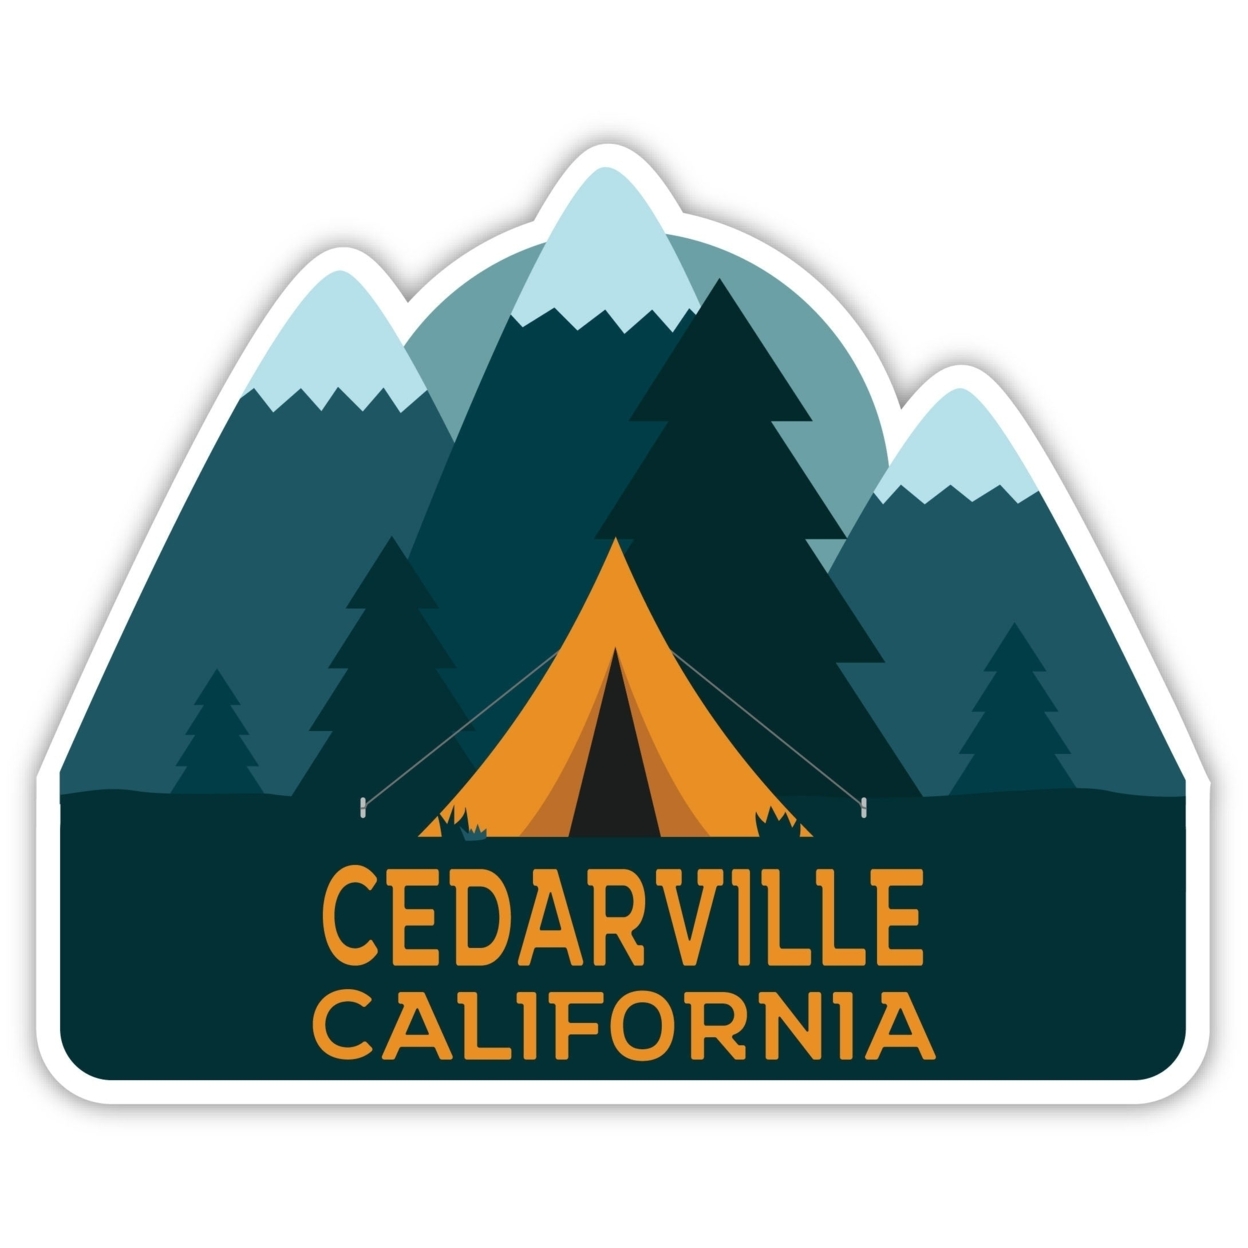 Cedarville California Souvenir Decorative Stickers (Choose Theme And Size) - 4-Pack, 4-Inch, Tent